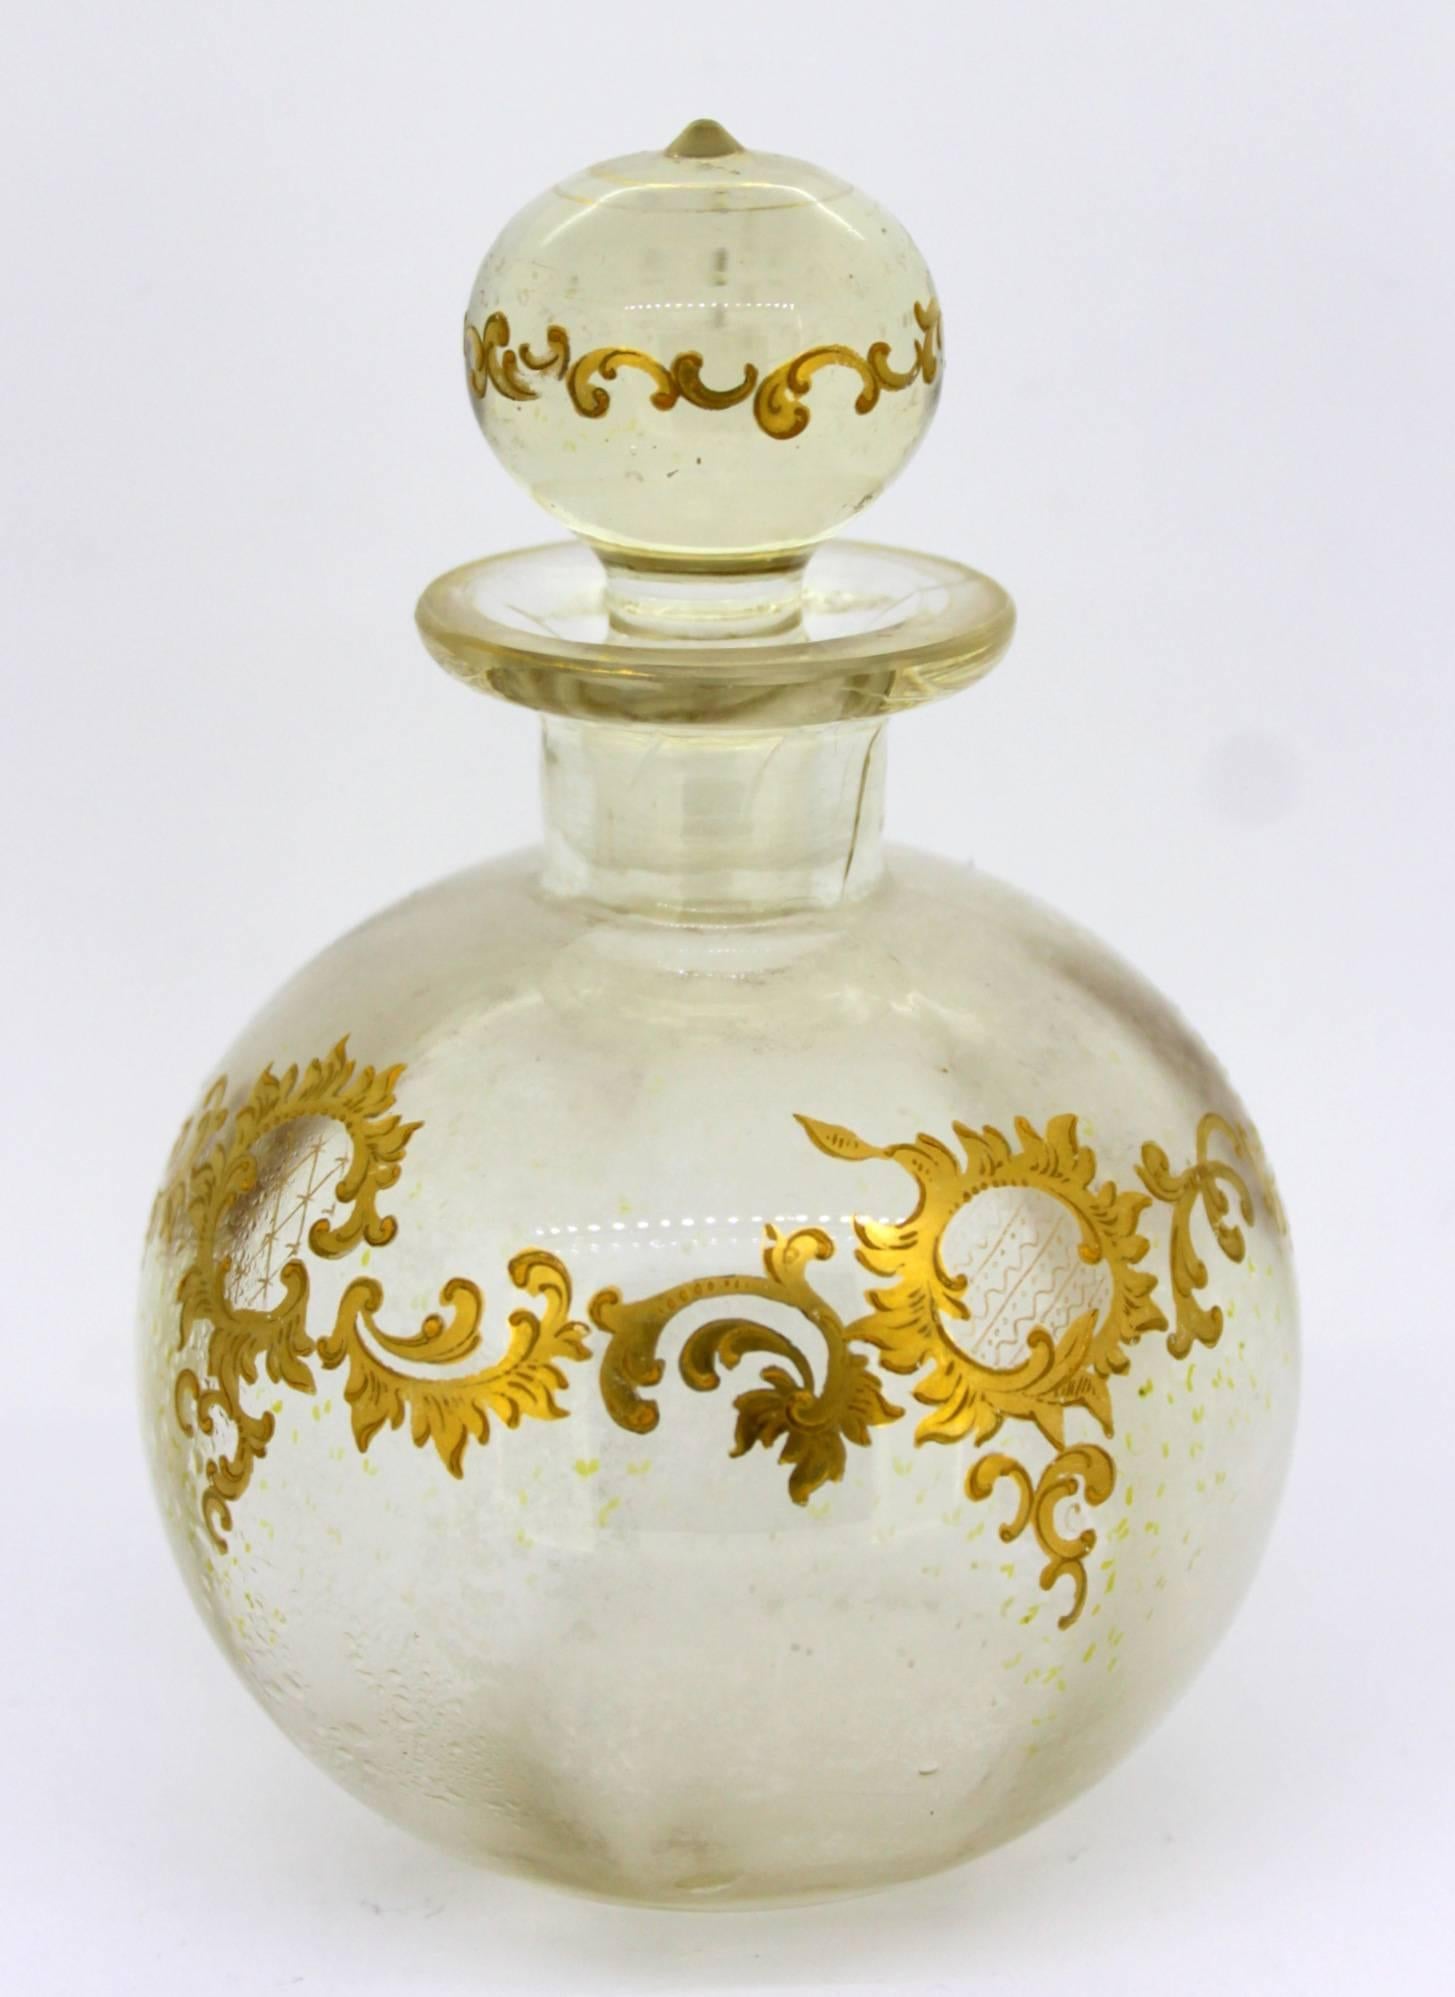 Vintage Murano glass perfume flask
circa 1950s

Approx dimensions
Diameter x height: 10 x 15.2 cm
Approx weight 463 grams

Condition: Has some general age related wear along with some
minor surface wear, good overall condition with no